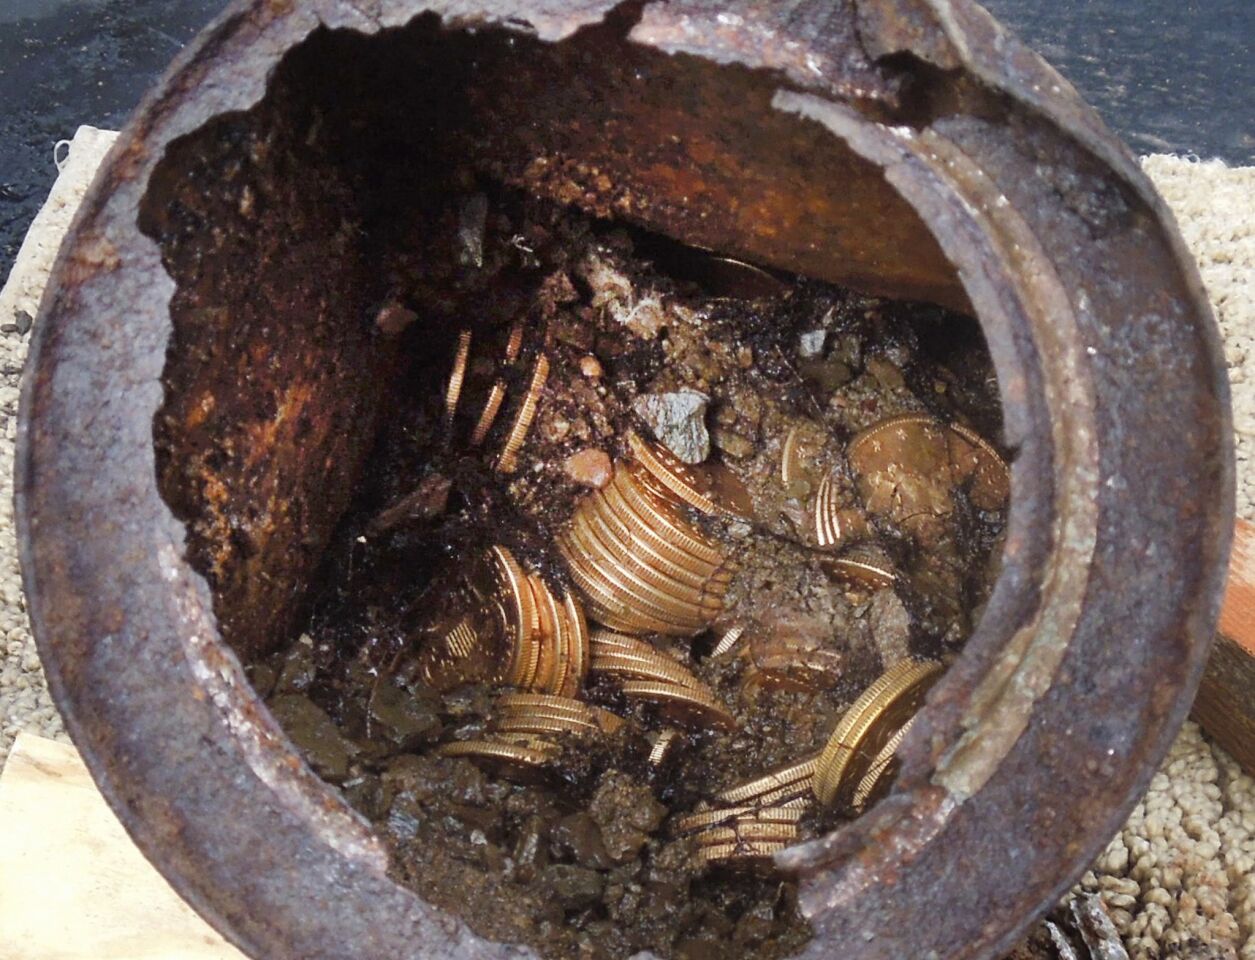 One of the six decaying metal canisters filled with 1800s-era U.S. gold coins unearthed by a couple on their property in California's gold country.